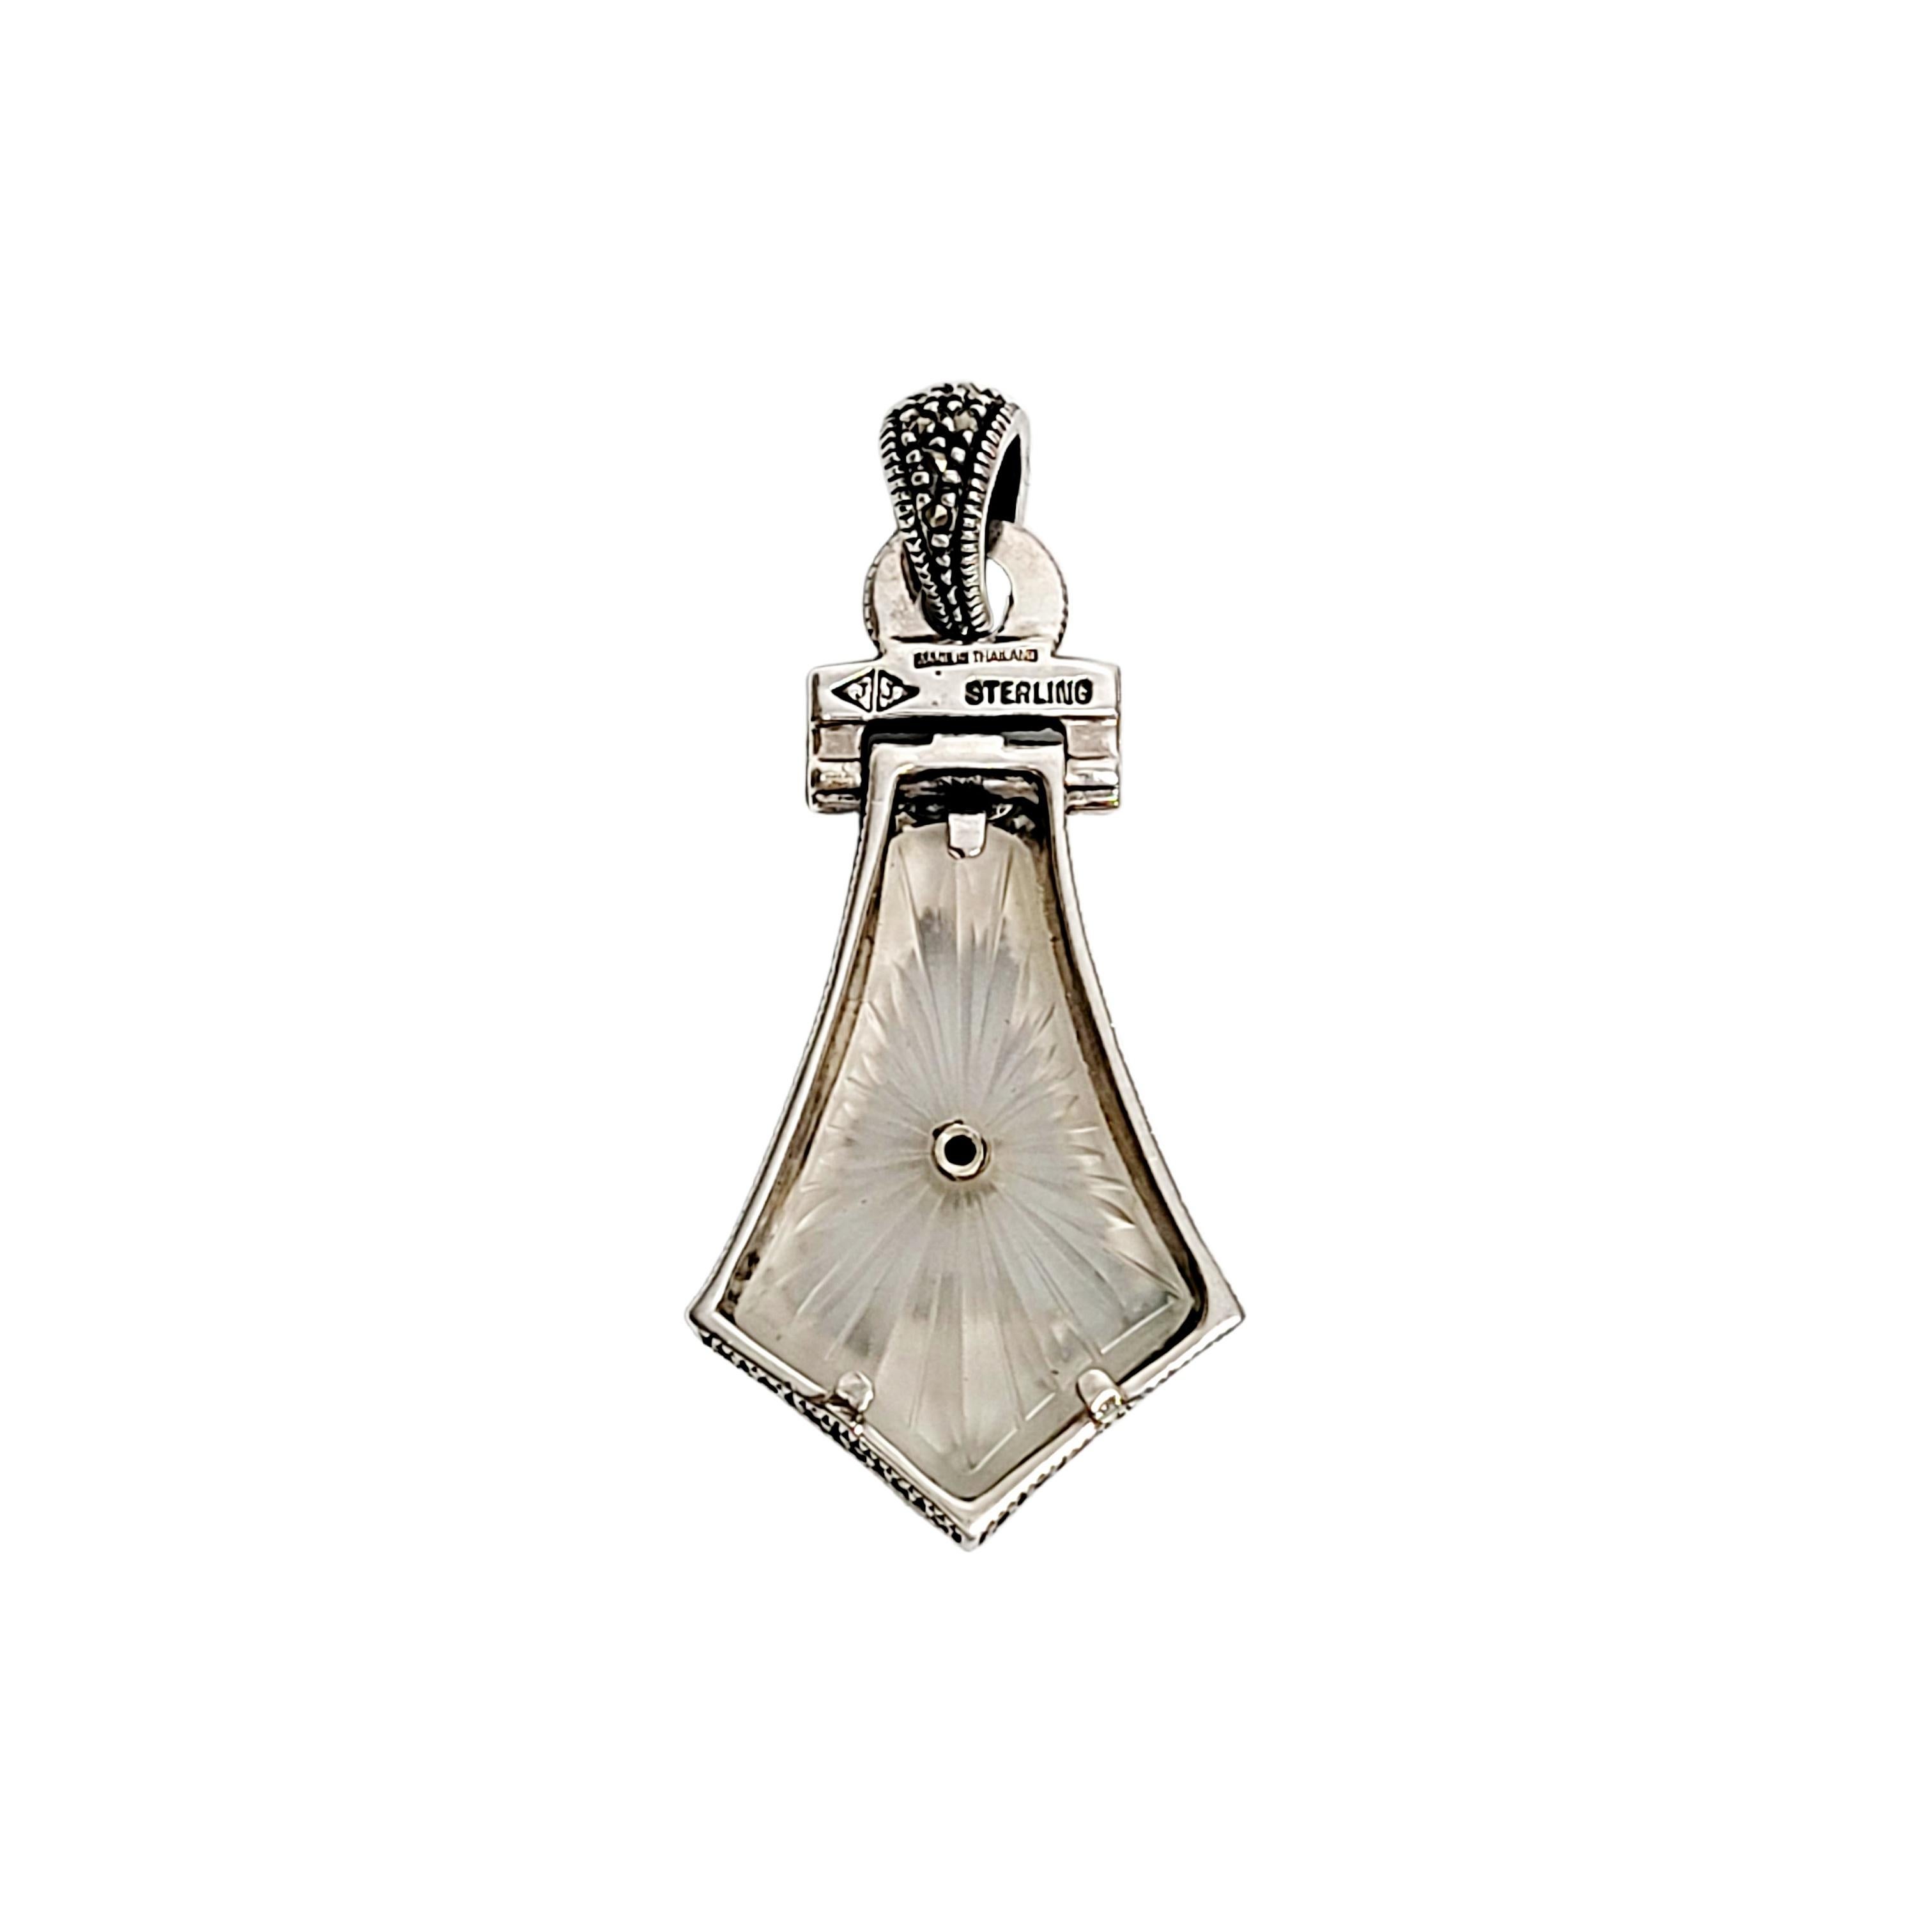 Sterling silver, marcasite and camphor glass pendant by Judith Jack.

Beautiful art deco design features camphor glass framed in marcasite encrusted sterling silver. Features leaf and floral designs.

Measures 2